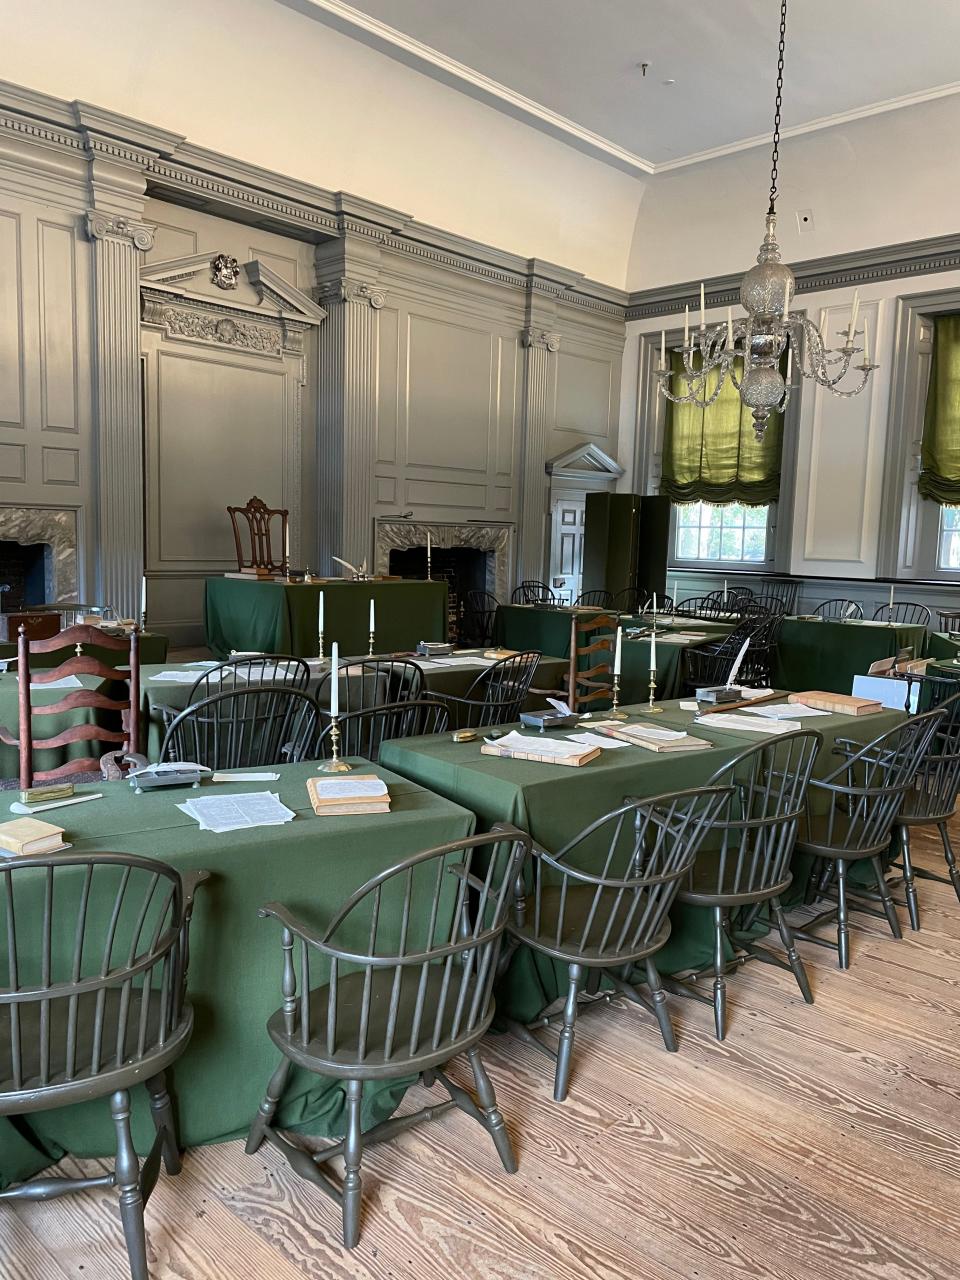 The room in the Pennsylvania
State House (now known as Independence Hall) where the signers of the Declaration of Independence met during the summer of 1776.